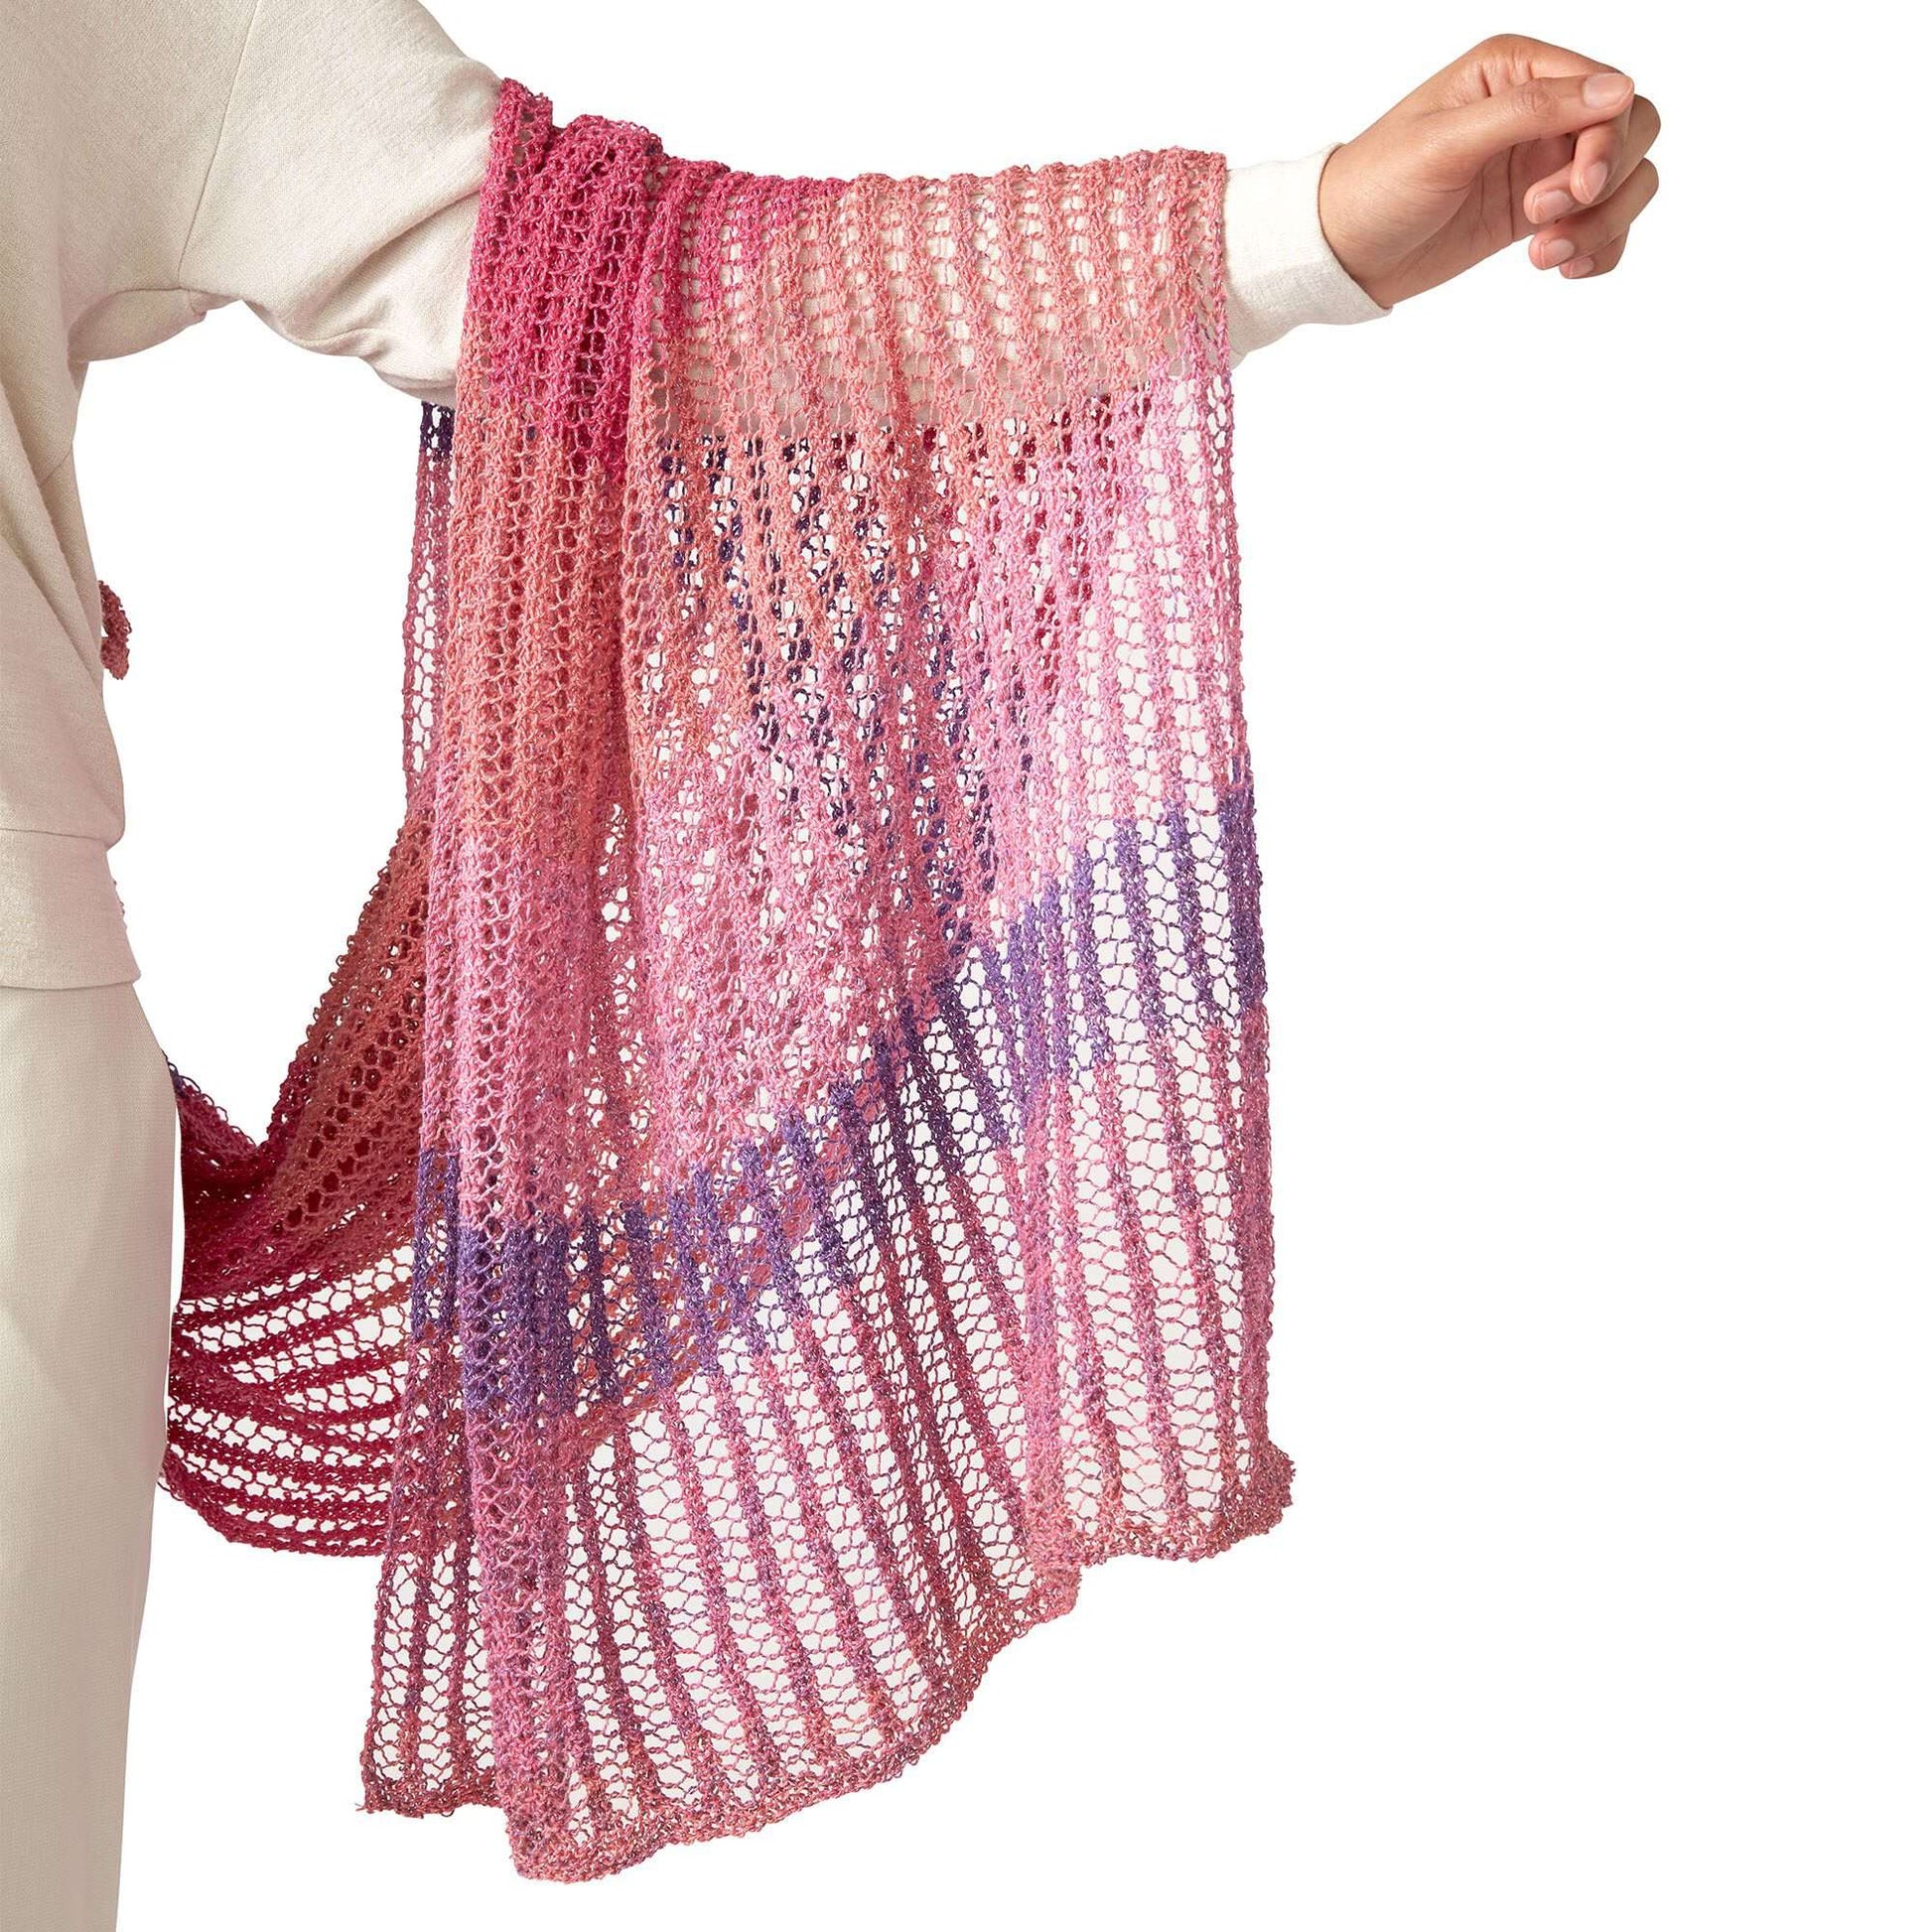 Free Red Heart Knit Airy Shawl Pattern